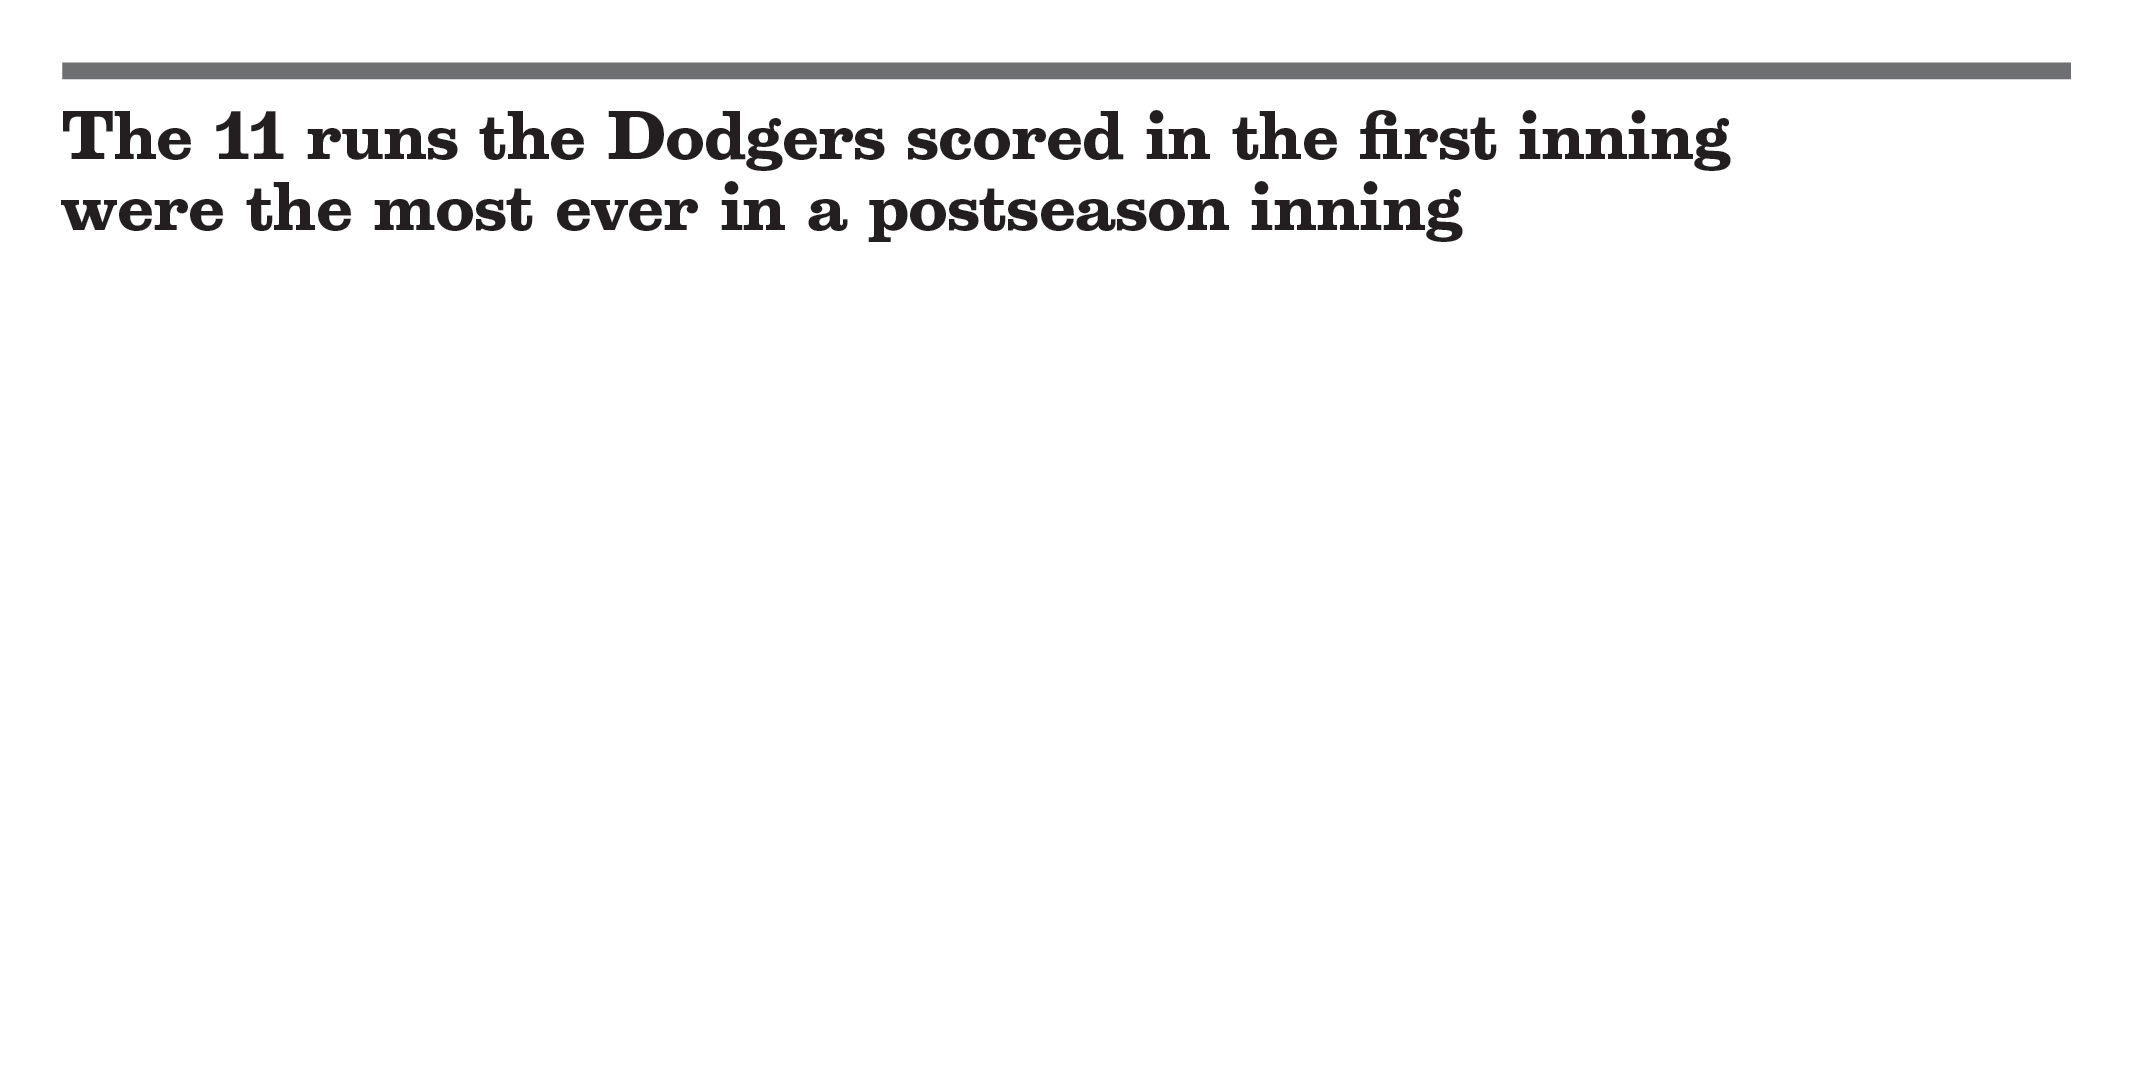 Dodgers' historic first inning if Game 3 of the NLCS against the Atlanta Braves on Oct. 14, 2020.